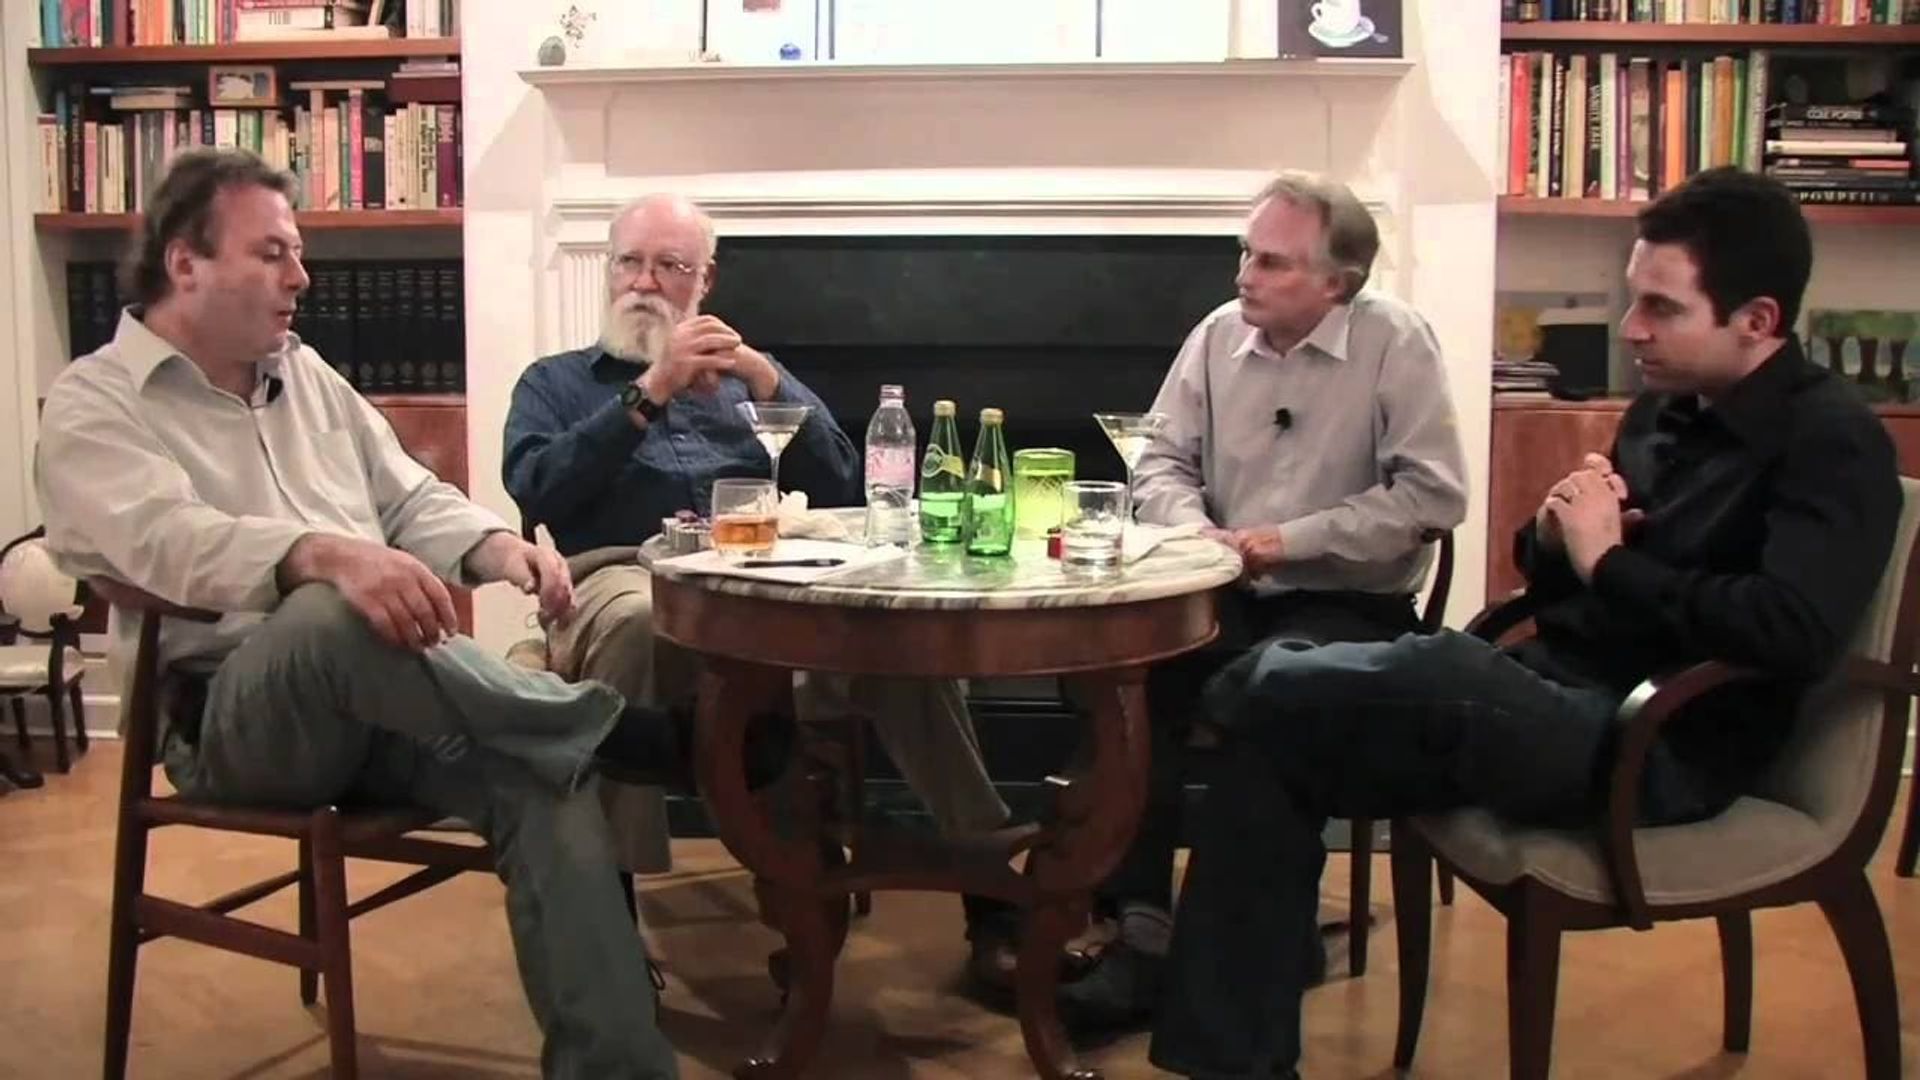 Discussions with Richard Dawkins, Episode 1: The Four Horsemen background